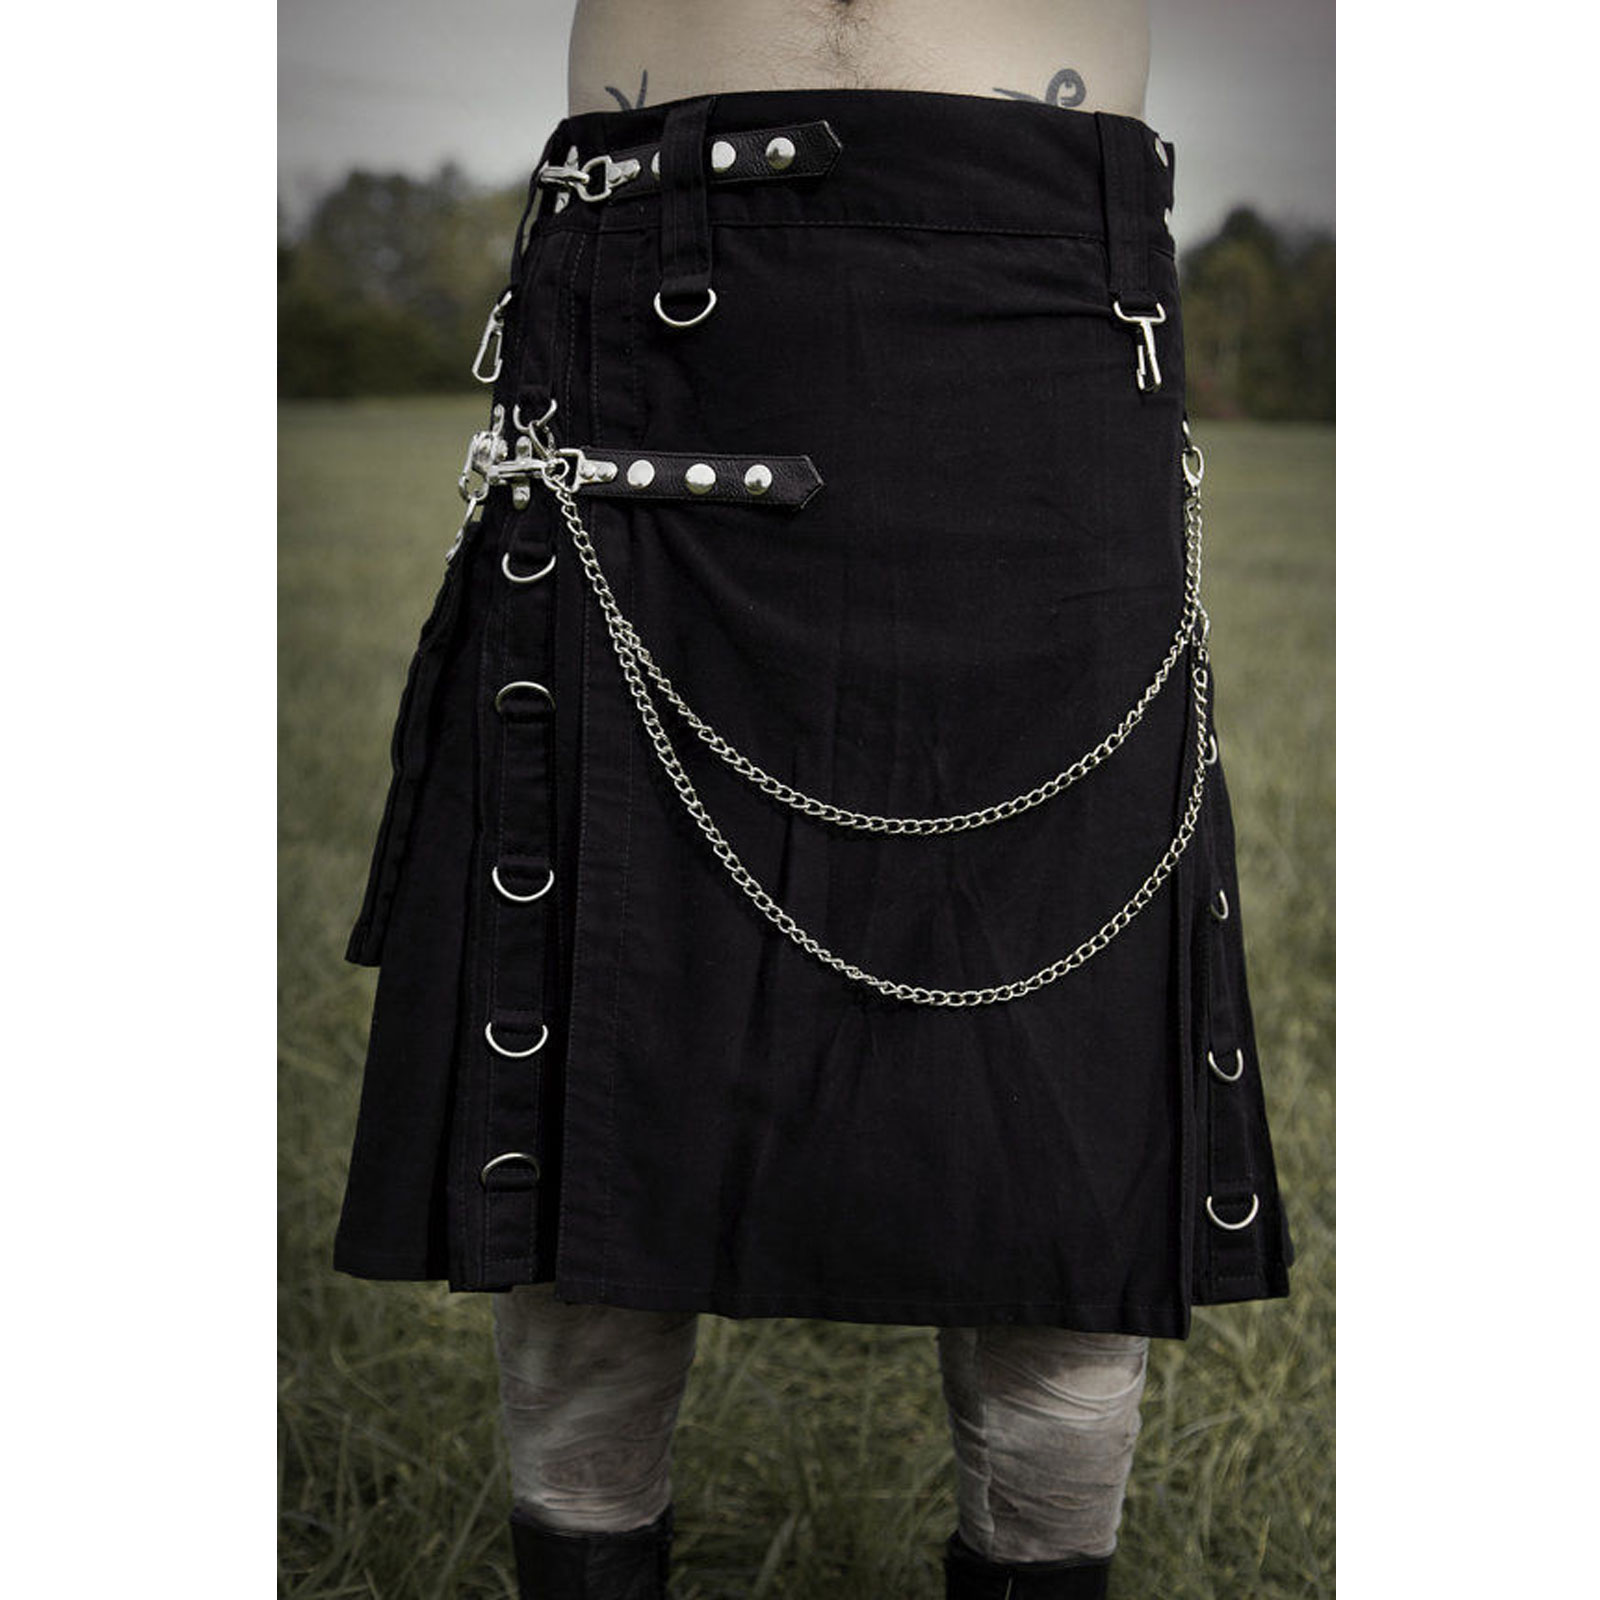 Mens Utility Combat Kilt Punk Goth Style FREE GIFT Various Styles All Sizes 